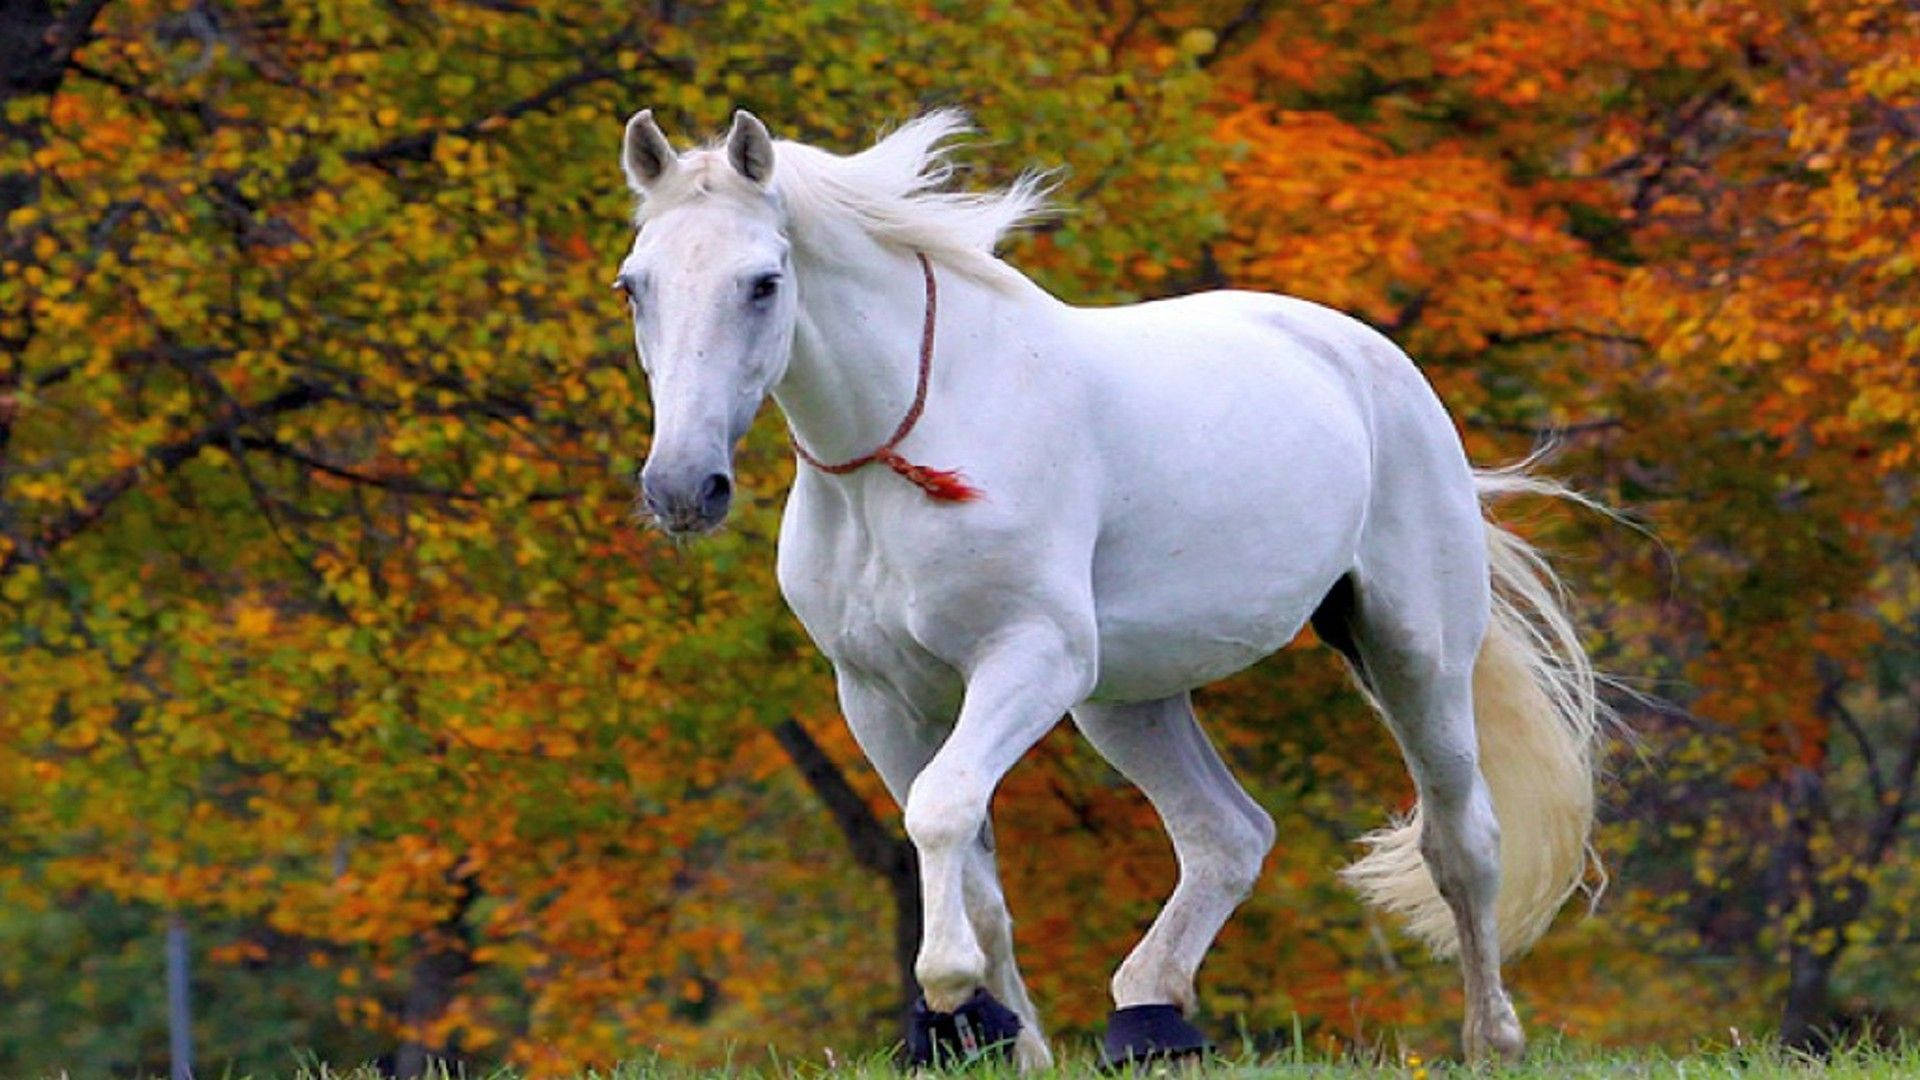 Little Cute White Horse Background